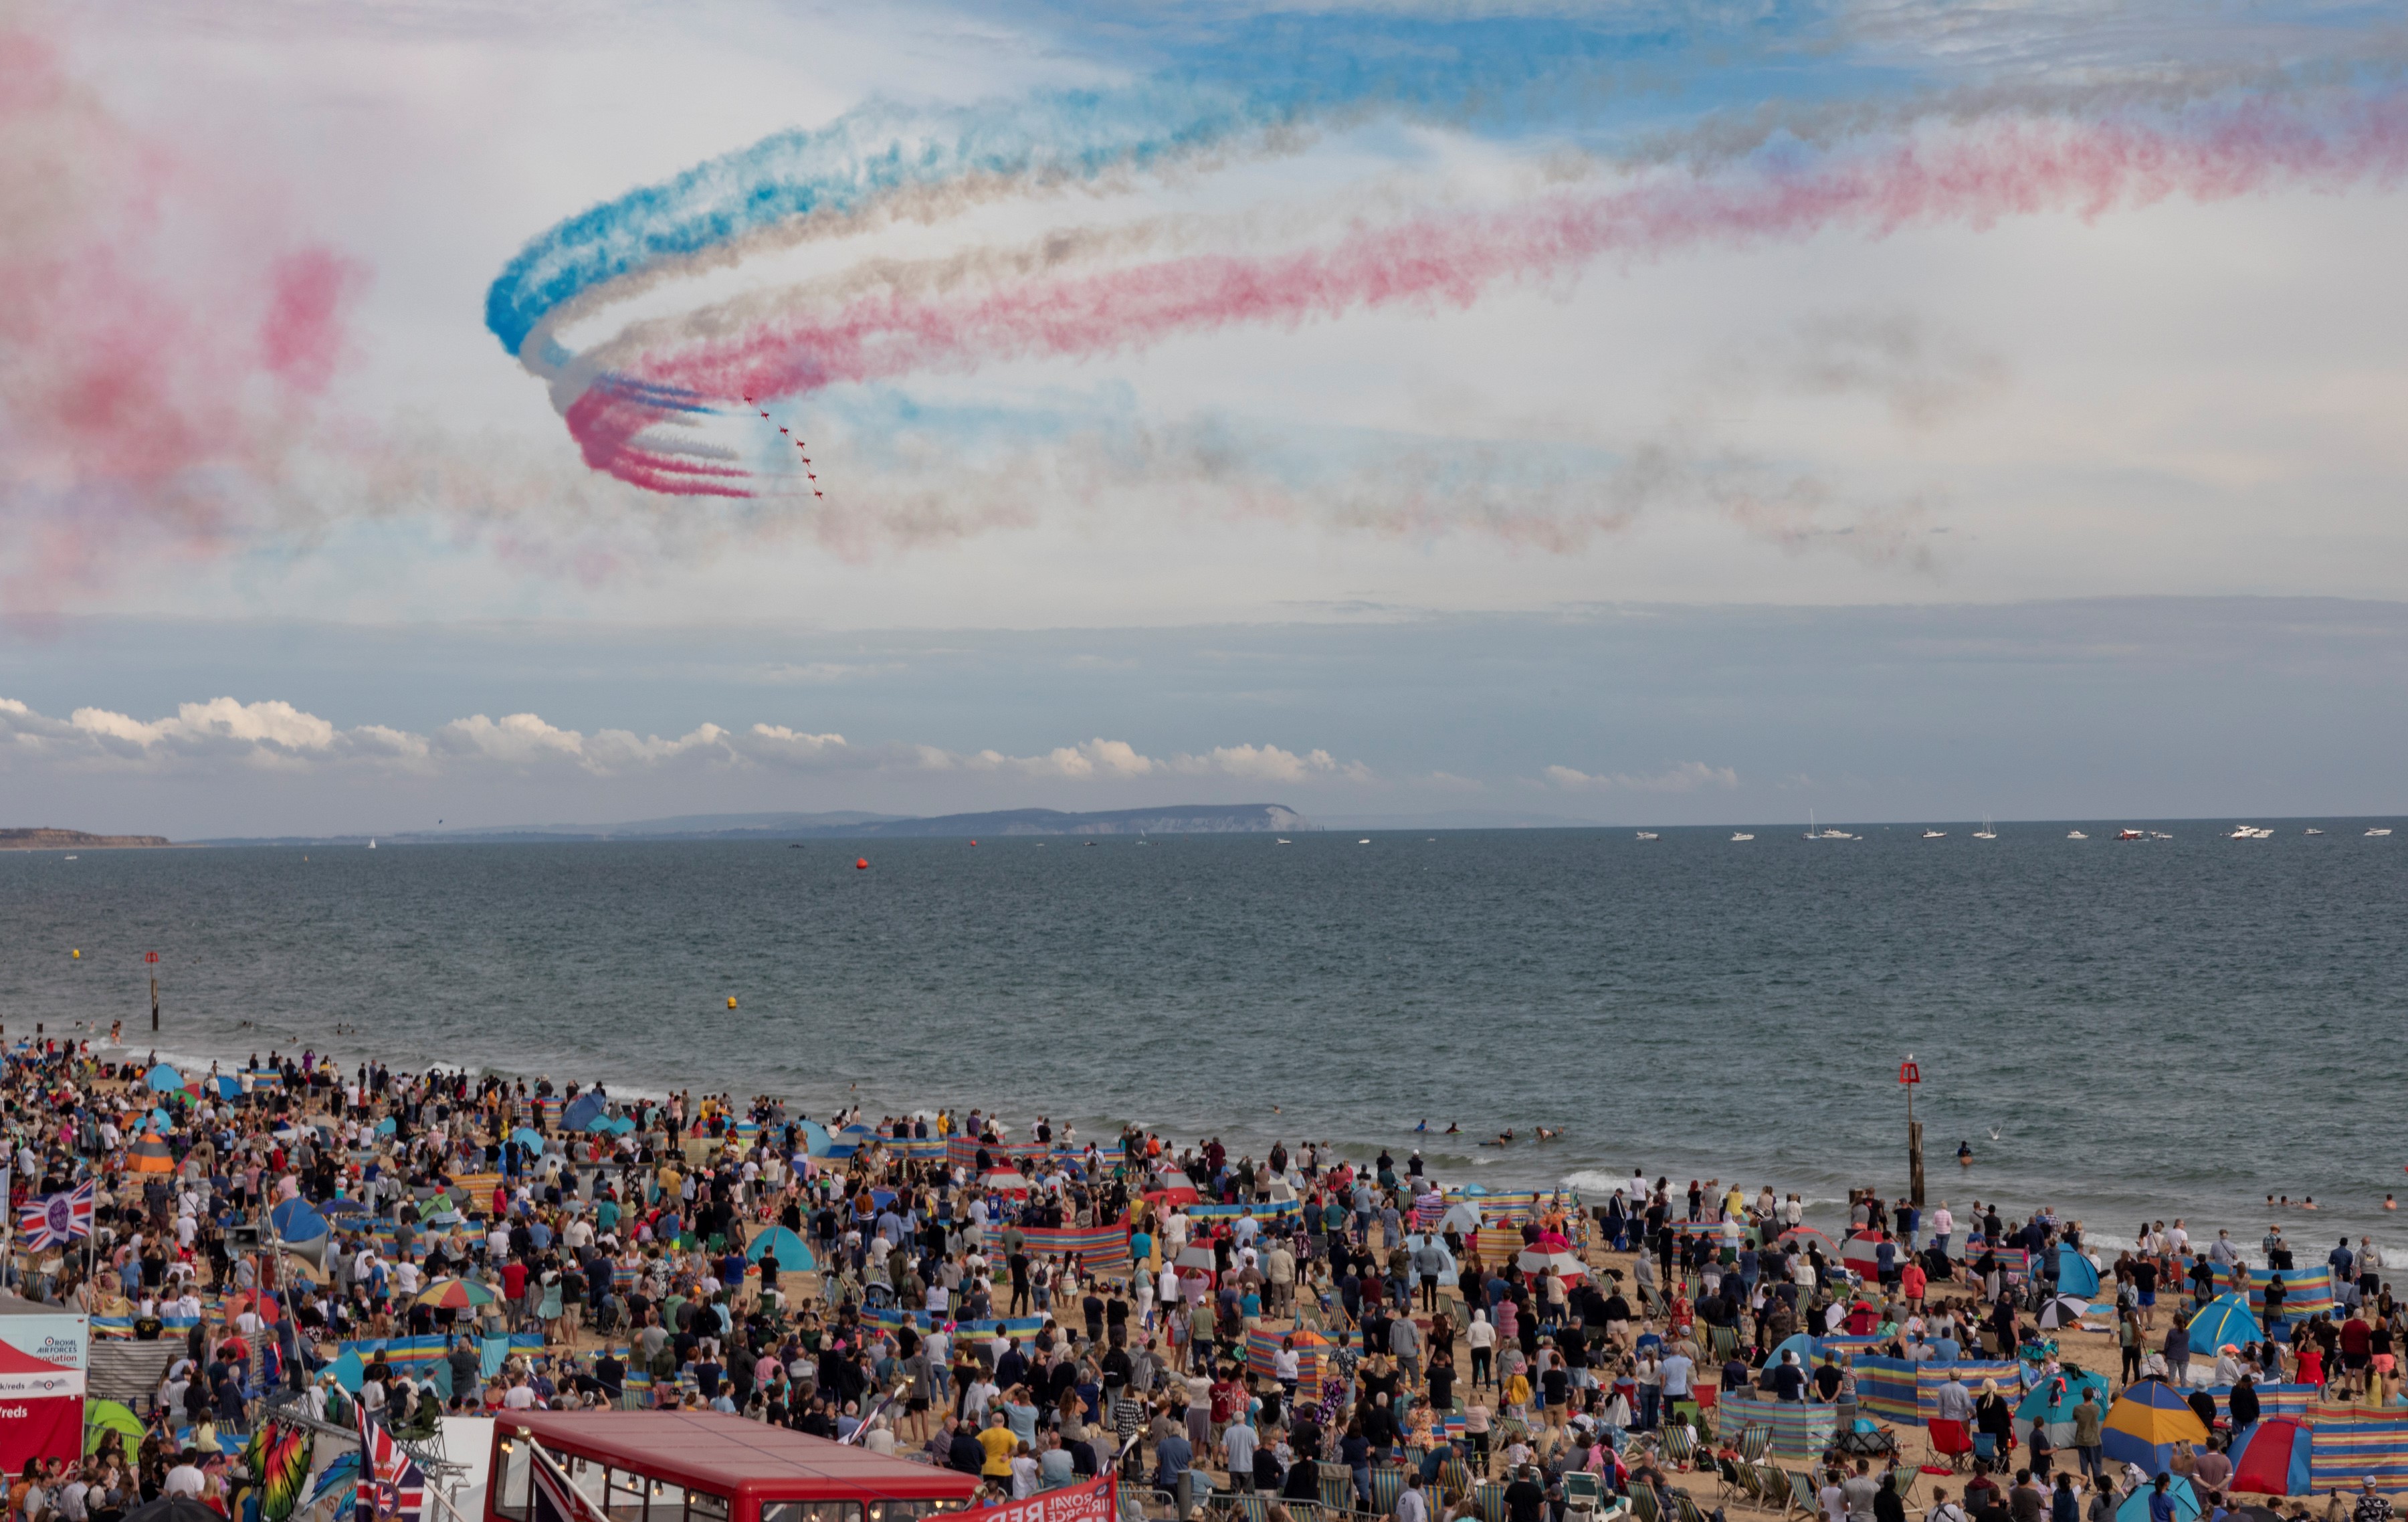 Bournemouth Air Festival, which attracts more than one million visitors, is one of the locations where people can see the Red Arrows in 2023.